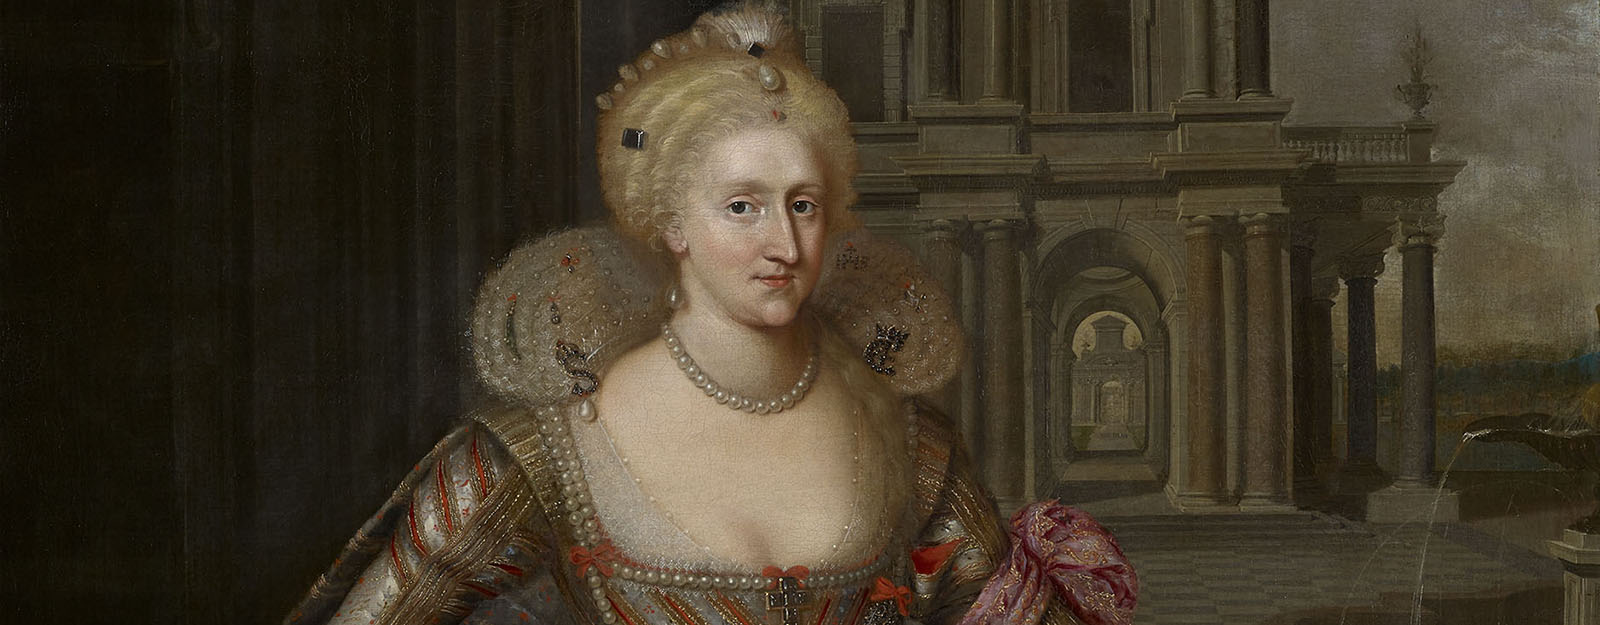 Painting of woman with a large lace collar and wide skirt